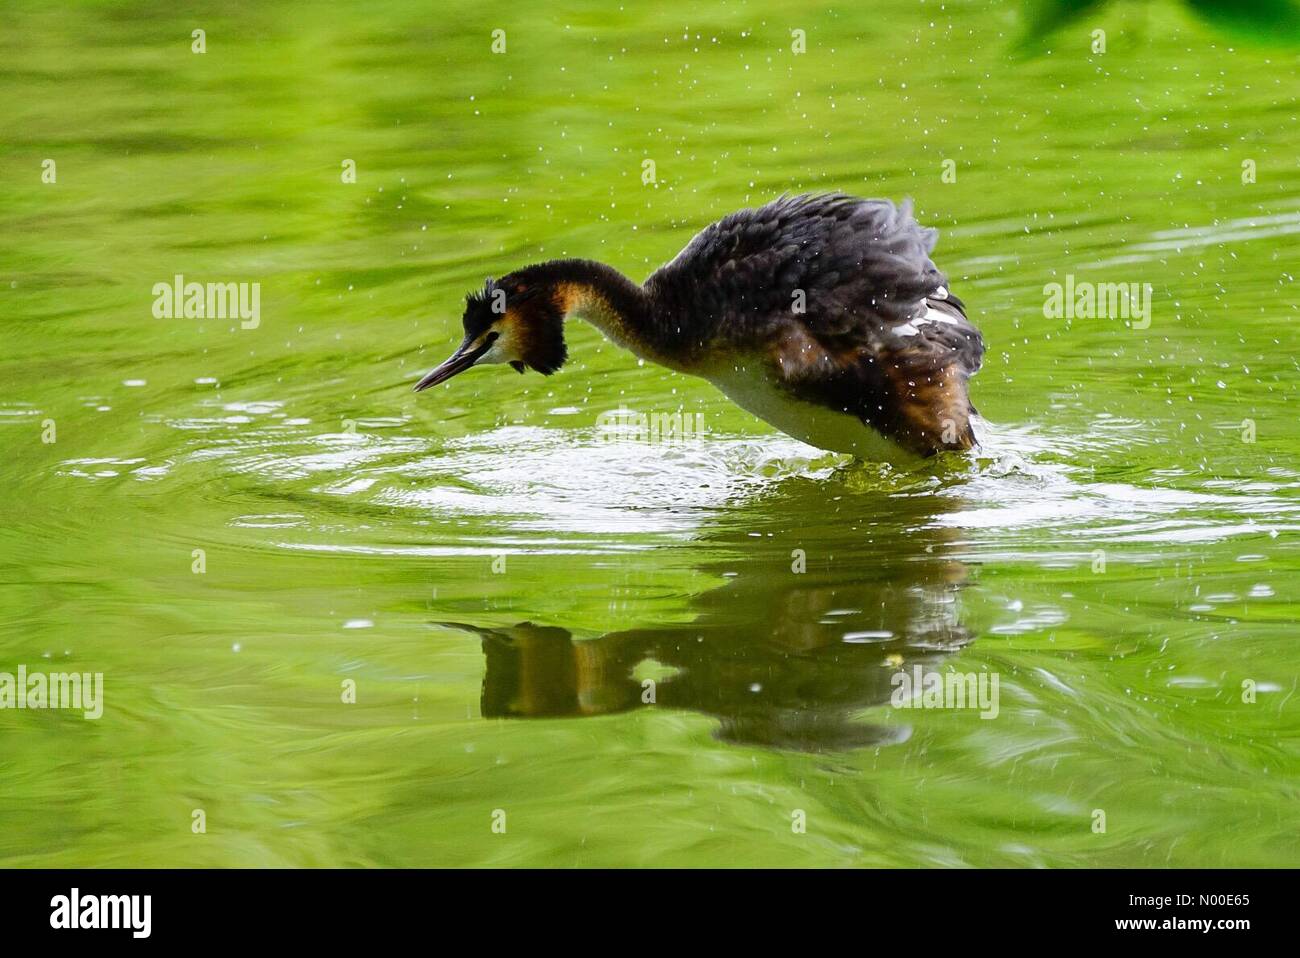 Godalming, UK. 23rd May, 2017. UK Weather: Grebes in Godalming. Summers Rd, Godalming. 23rd May 2017. High pressure conditions brought warm and dry weather to the Home Counties today. A pair of grebes with babies in Godalming. Credit: jamesjagger / StockimoNews/Alamy Live News Stock Photo